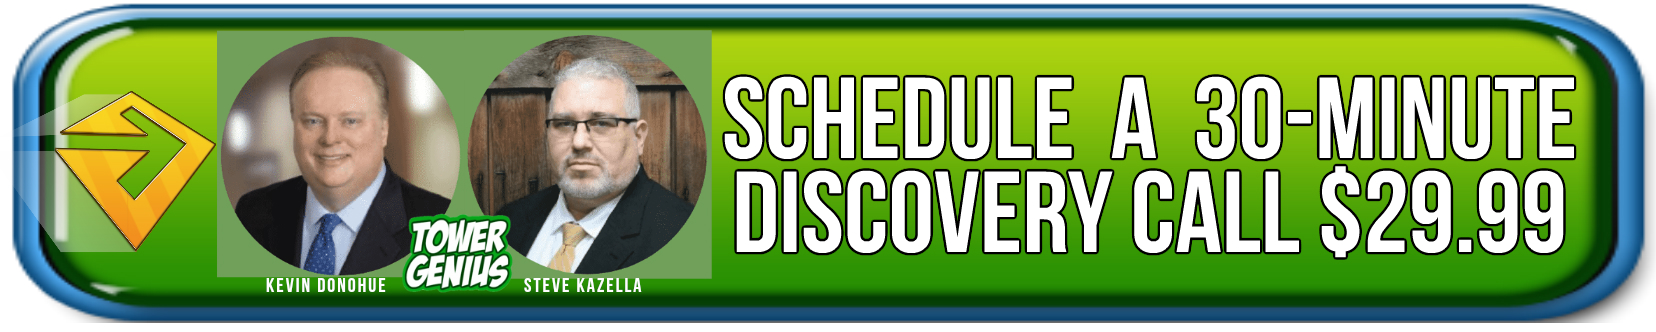 CLICK TO SCHEDULE YOUR 30-MINUTE TOWER GENIUS DISCOVERY CALL.